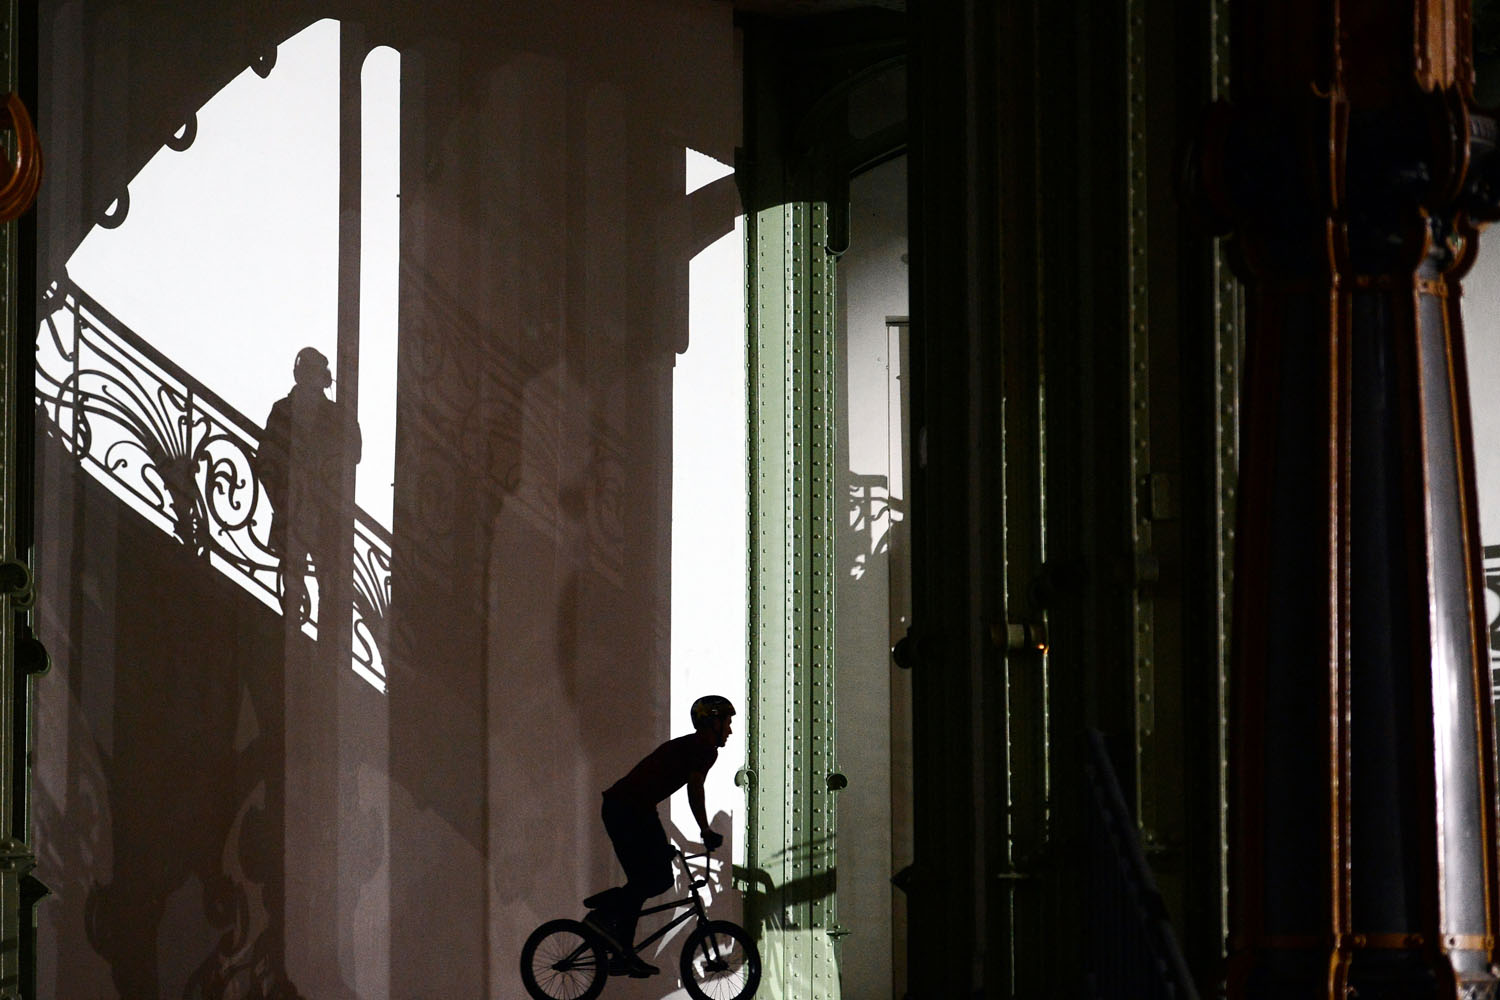 Image: Nov. 2, 2012. A rider concentrates prior to competing in the "Red Bull Skylines," an international BMX competition at the Grand Palais in Paris.